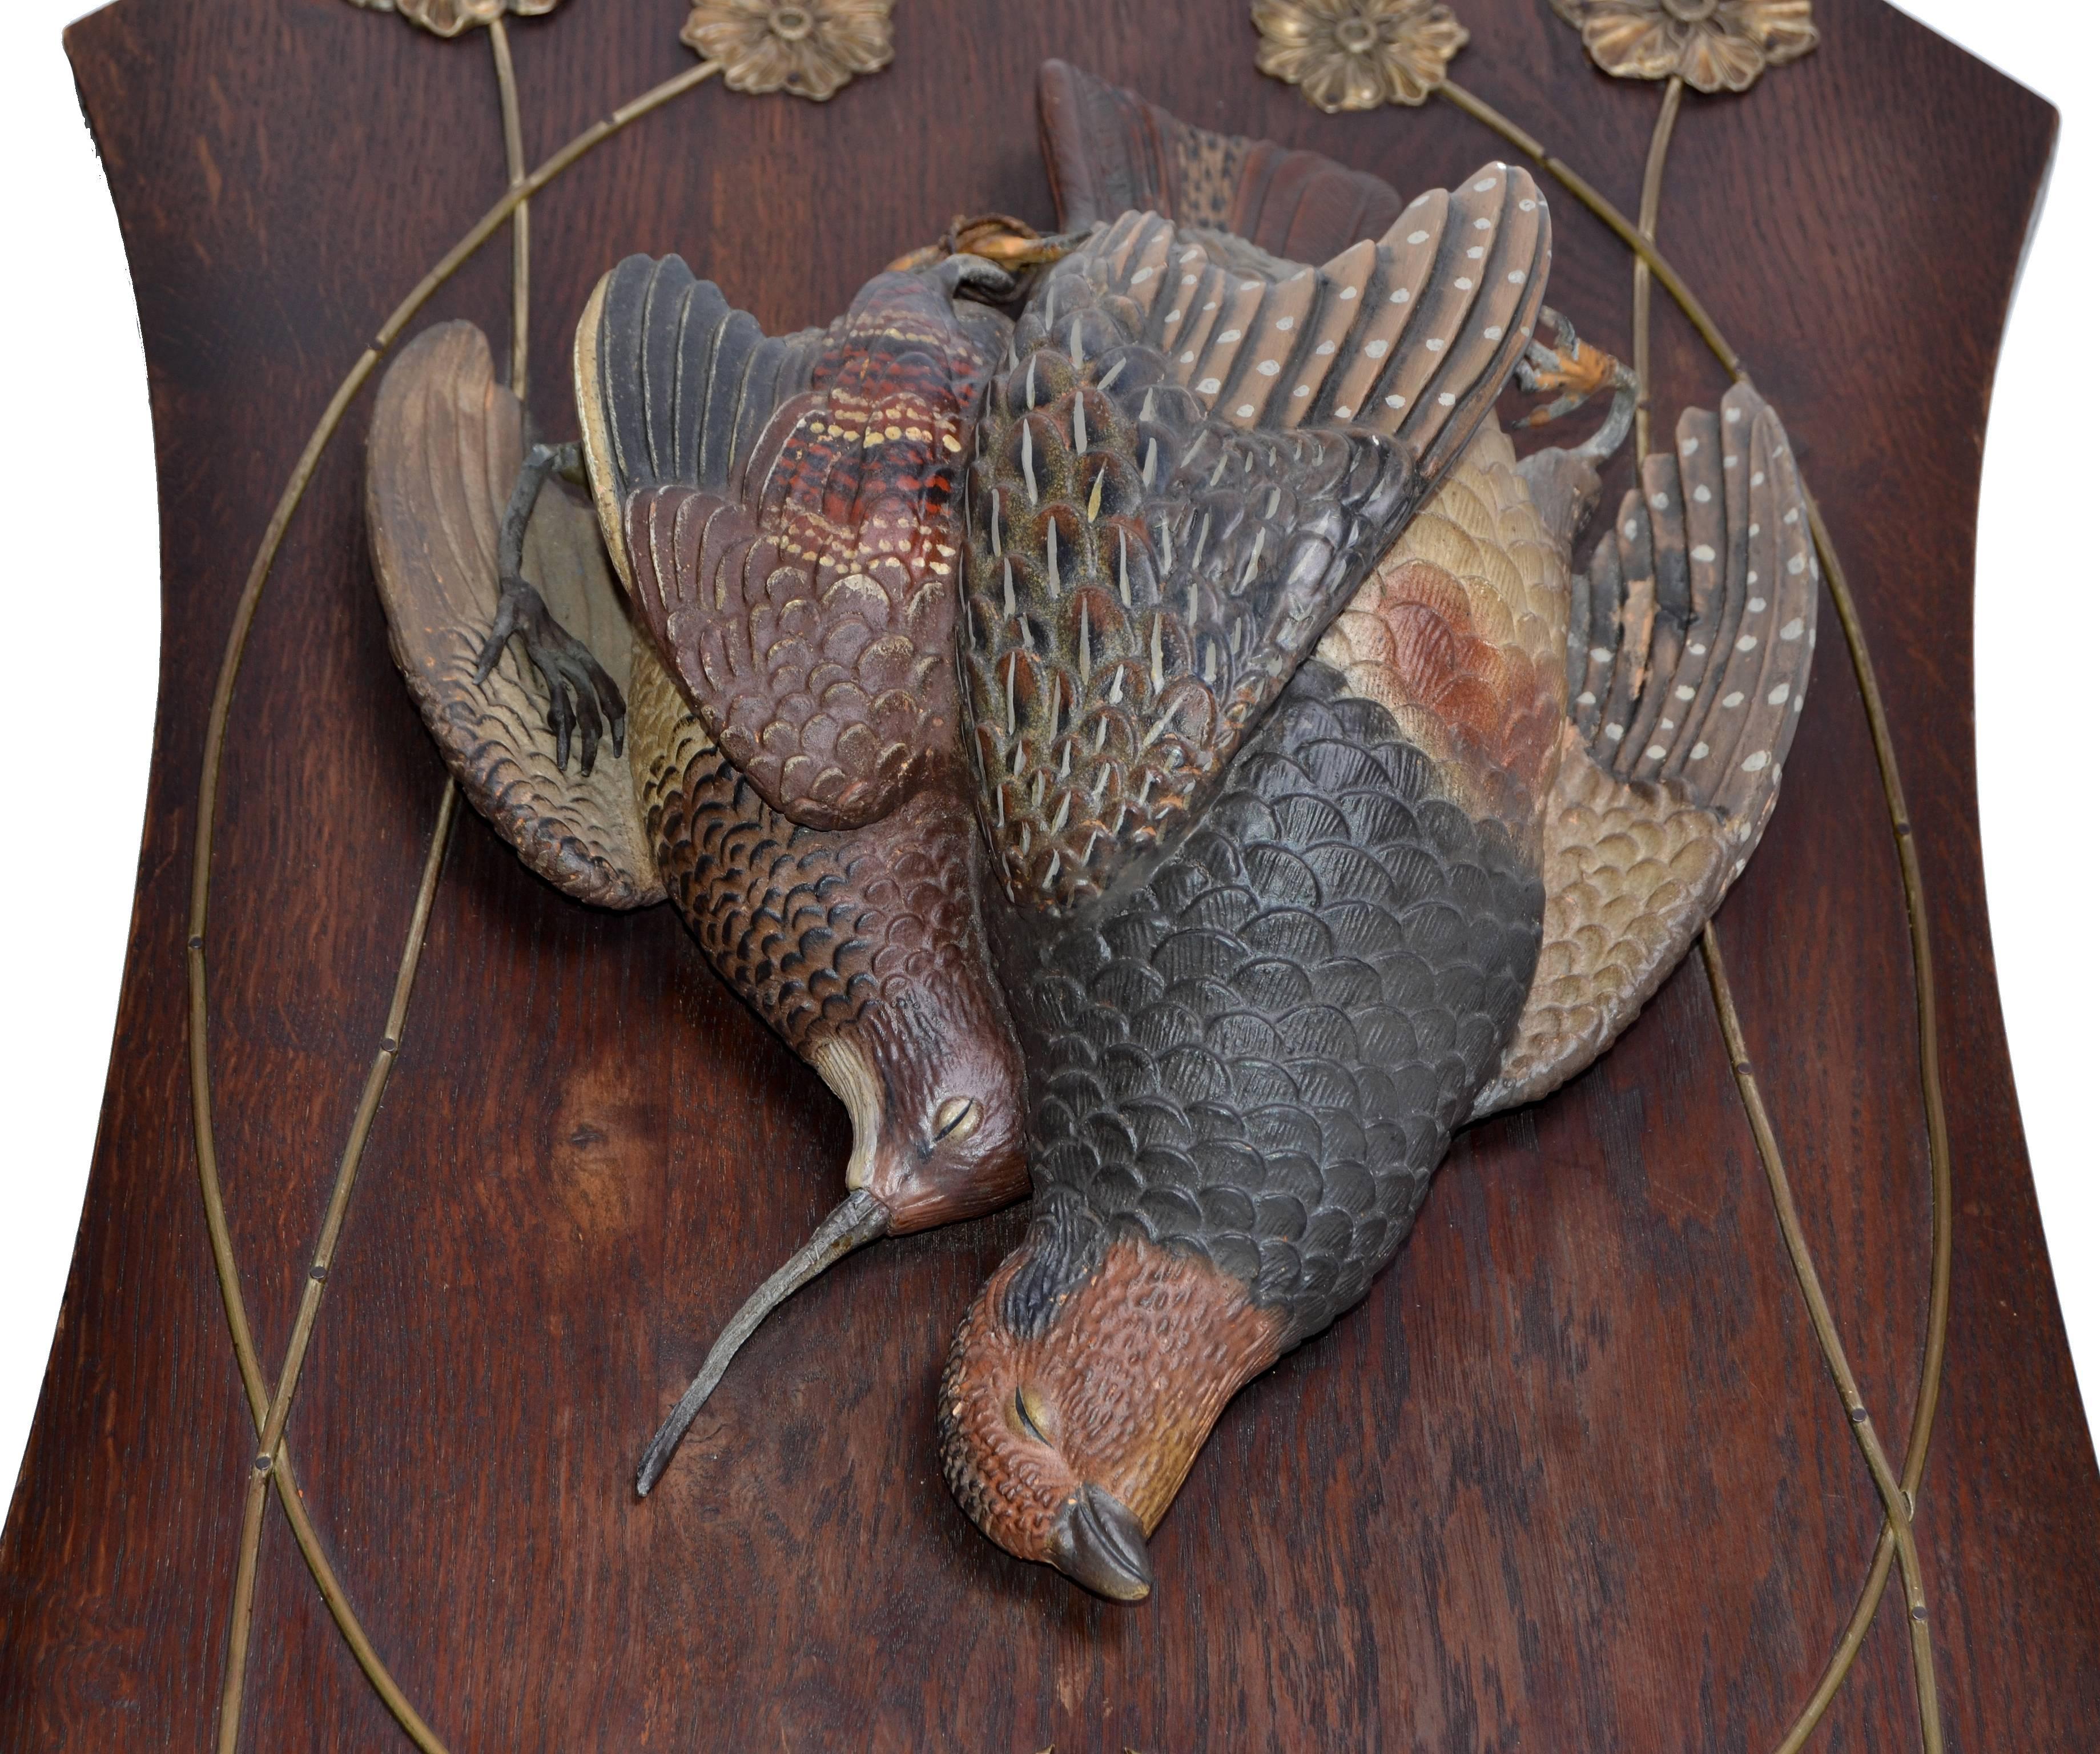 A pair of striking black forest Terracotta handmade Pheasant Birds mounted on a solid oak plaque with brass flowers and brass details.
These Animal Sculptures, Fine Art Pheasants are handmade out of Terracotta and hand painted. 
Secure Hanging